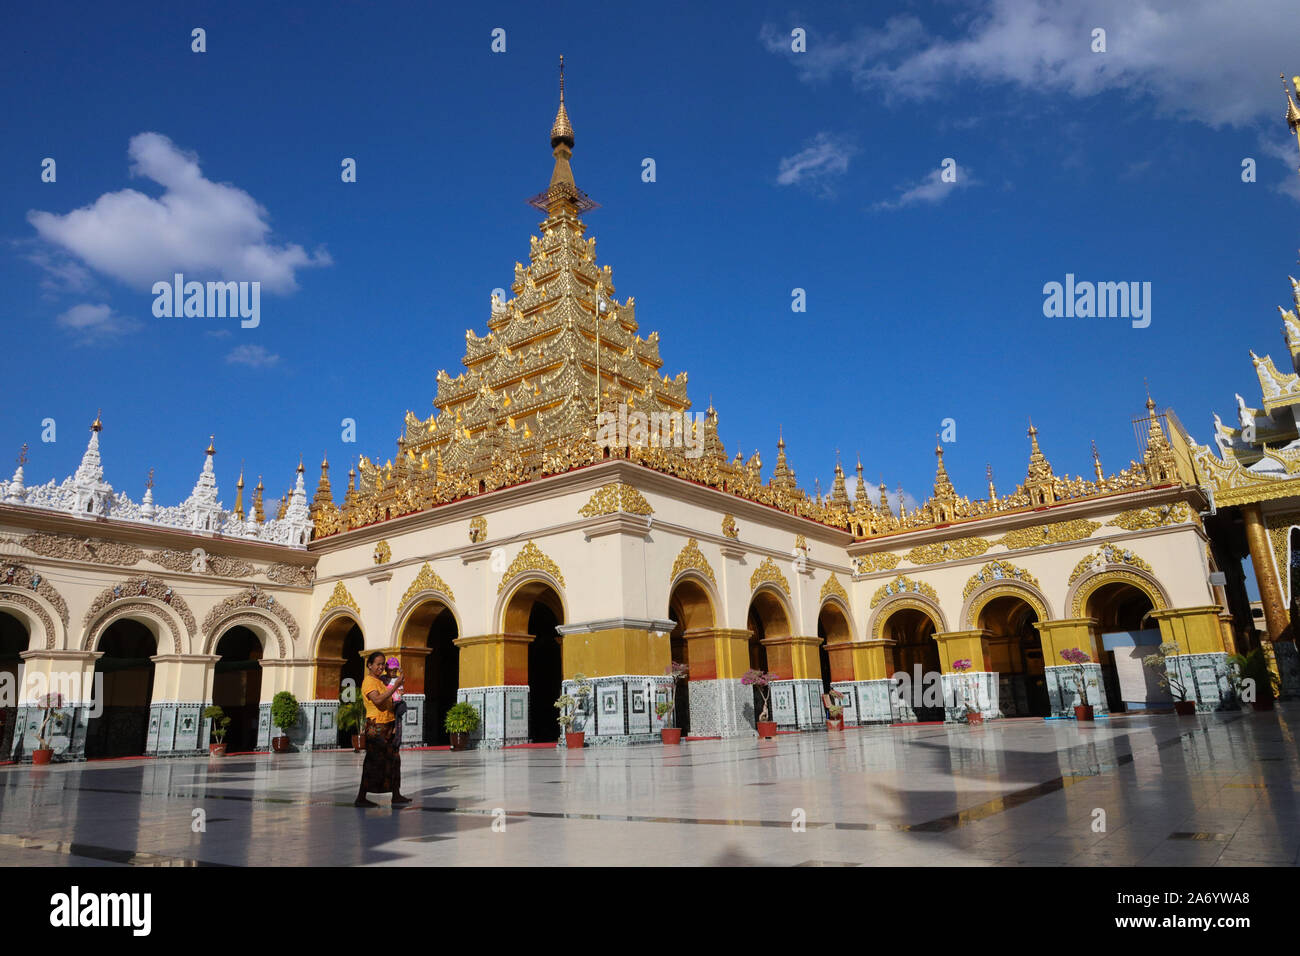 MANDALAY/MYANMAR(BURMA) - 29th Oct, 2019 : The Mahamuni Pagoda or Mahamuni Buddha temple is one of the most famous Buddhist Statue in Burma which is l Stock Photo